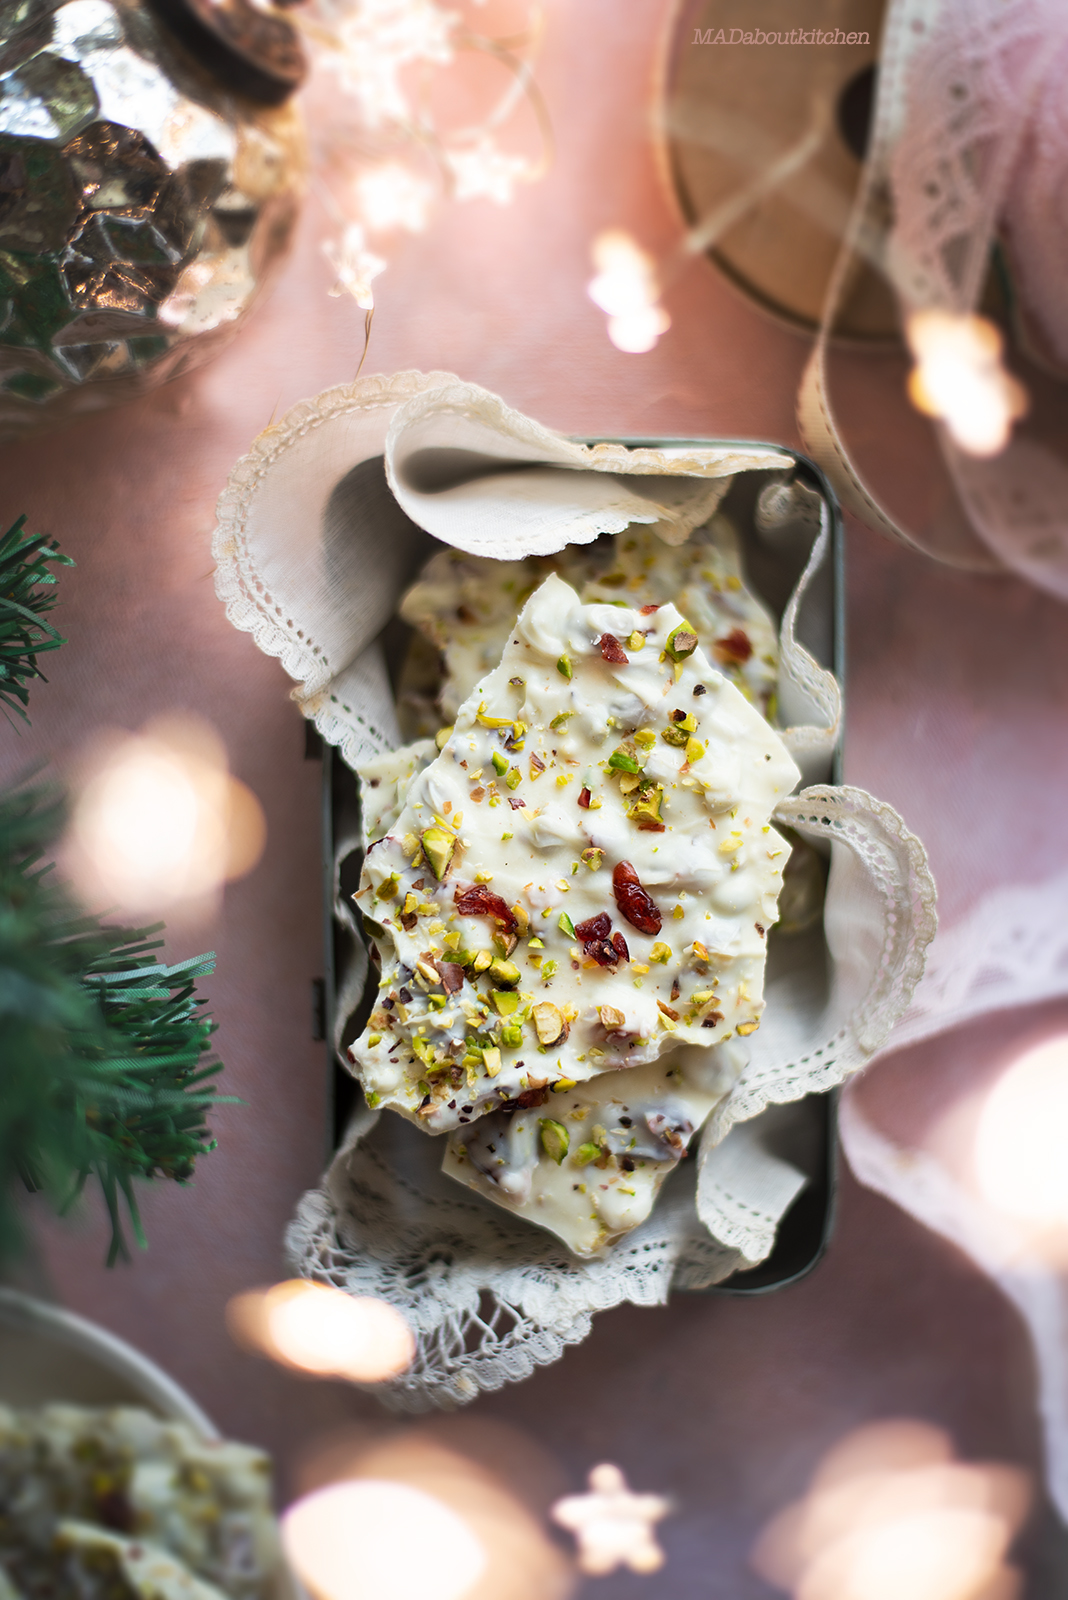 White Chocolate Barks with Pistachio and Cranberry are one of the most easiest Christmas treats you could make. It takes not more that 5 mins to make it.